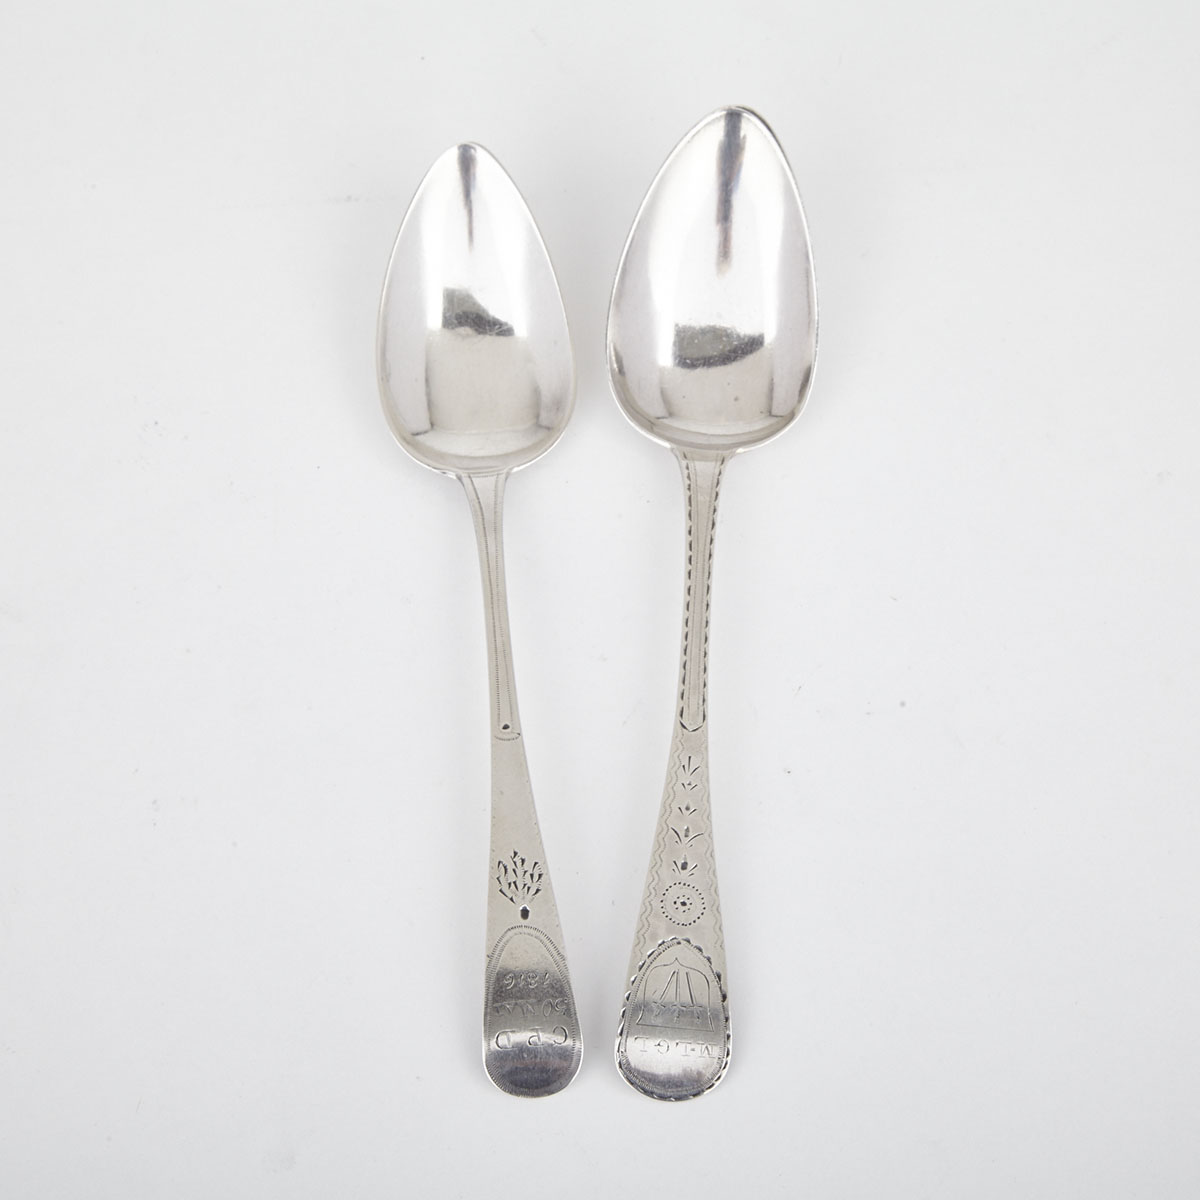 Two Channel Islands Silver Bright-Cut Old English Pattern Table Spoons, Jacques Quesnel and Charles William Quesnel, Jersey, early 19th century